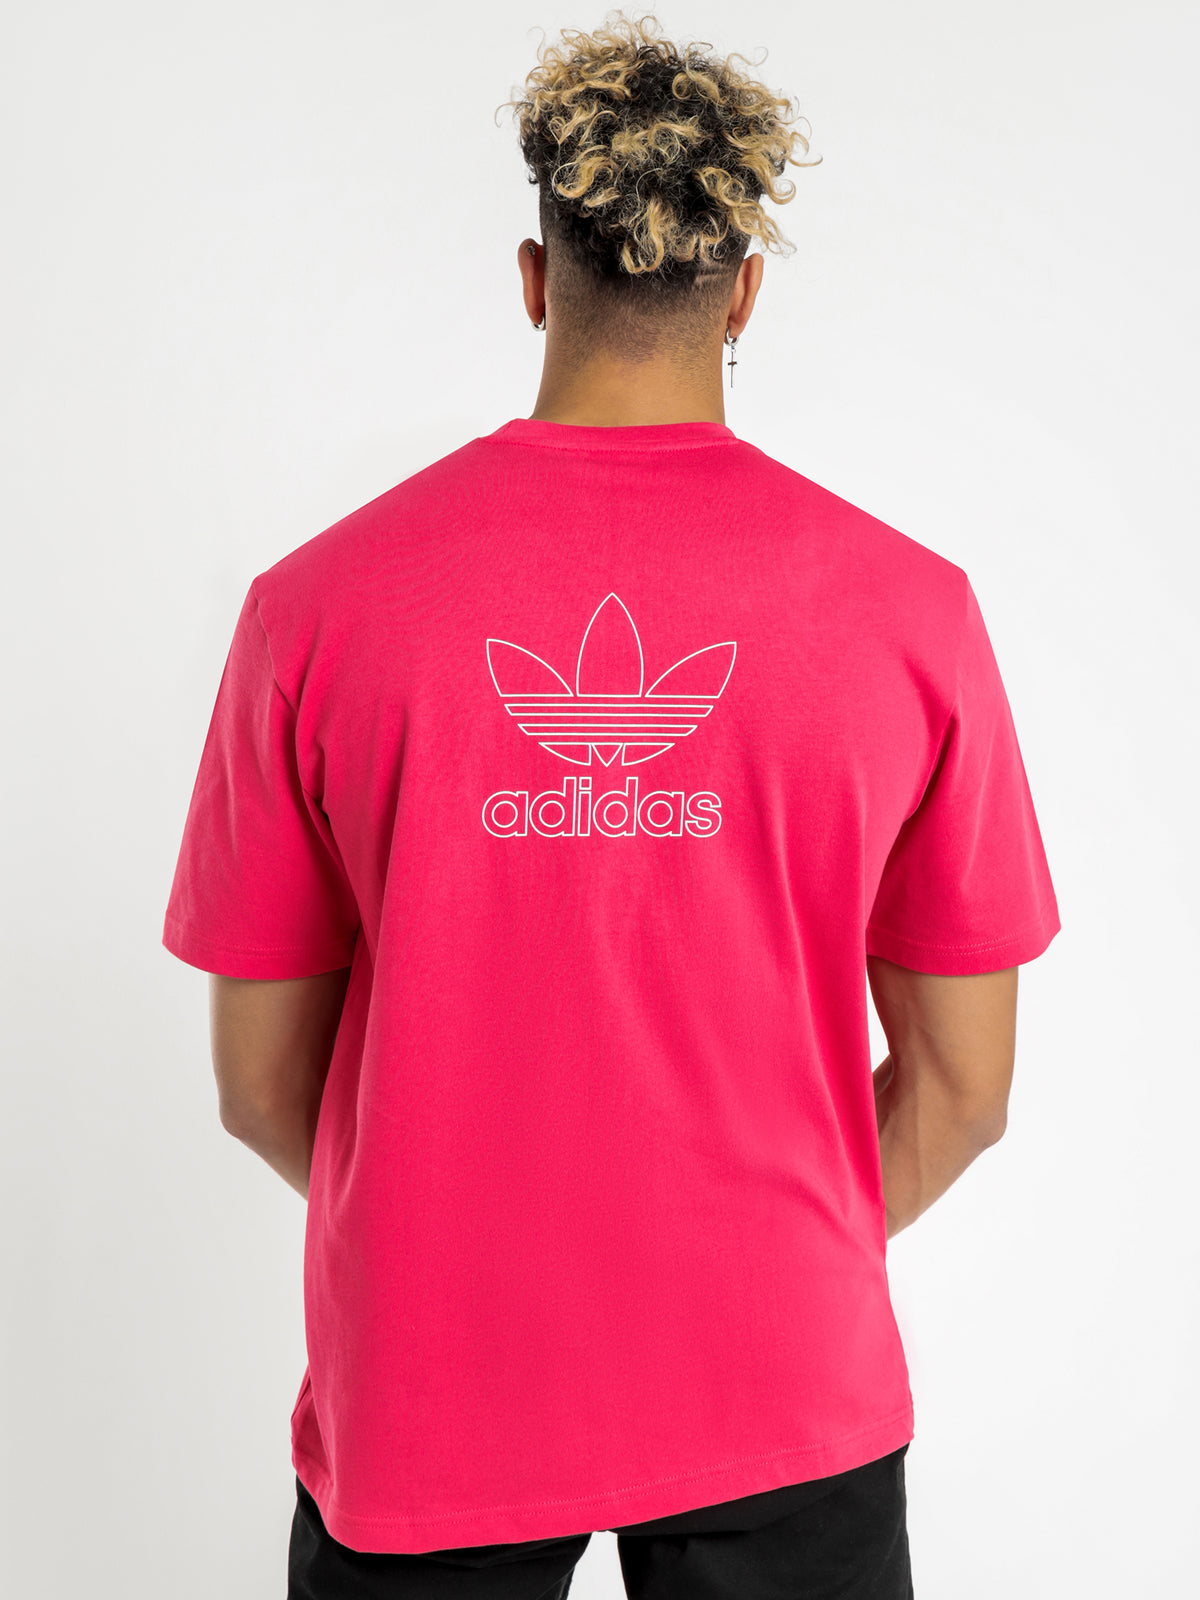 Originals Trefoil Boxy T-Shirt in Power Pink